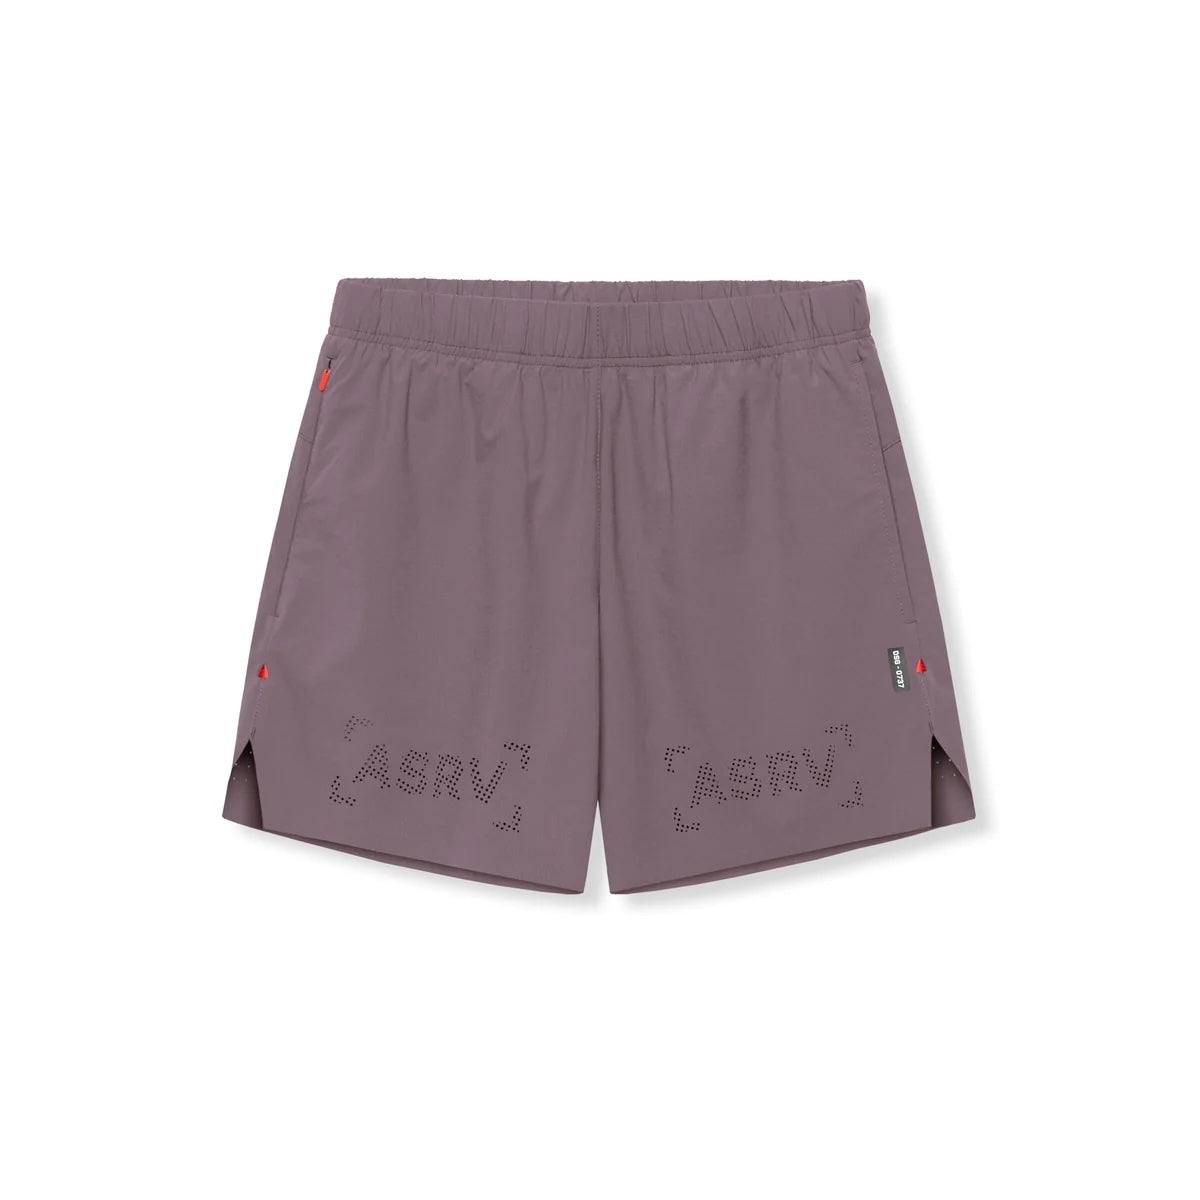 Ripstop 6" Perforated Shorts